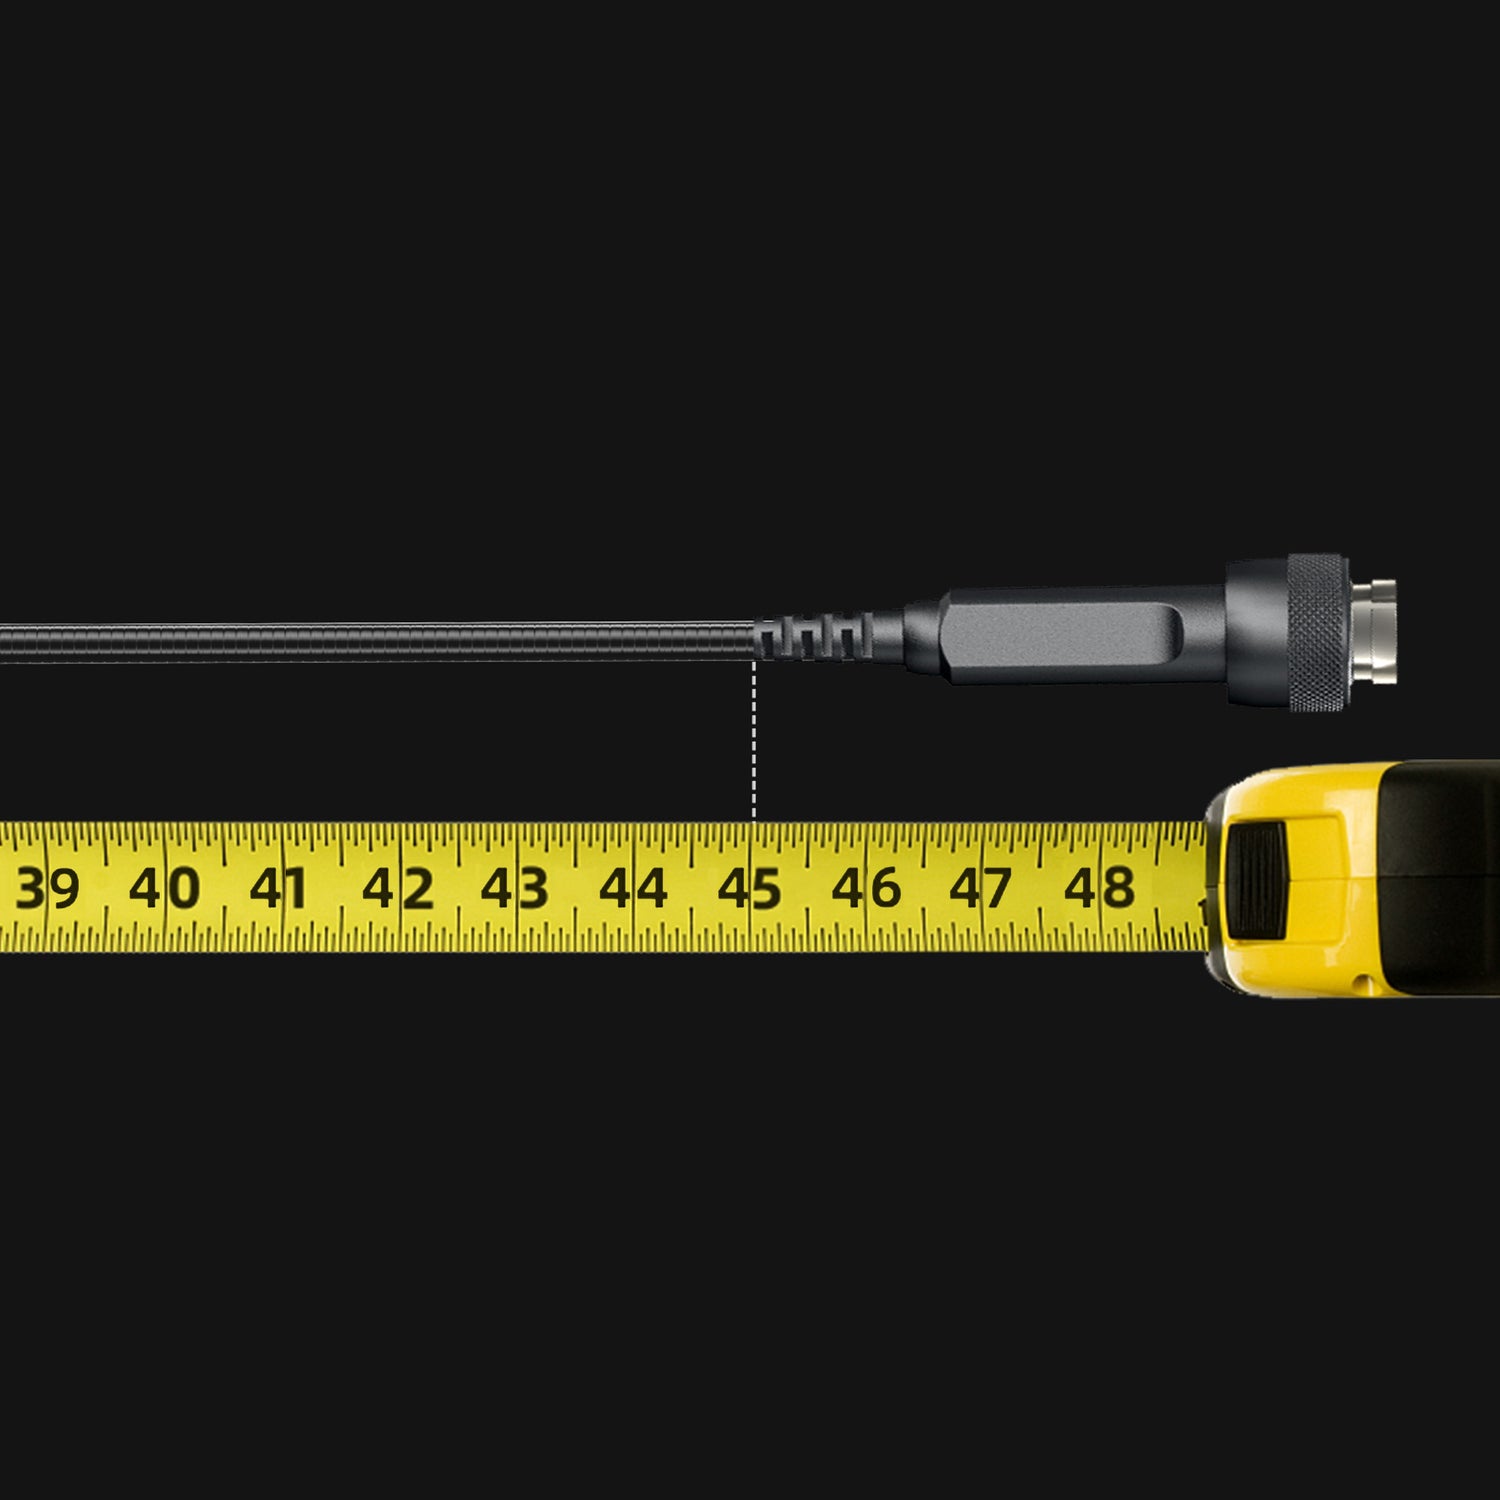 NTG100 is 45 Inches Long